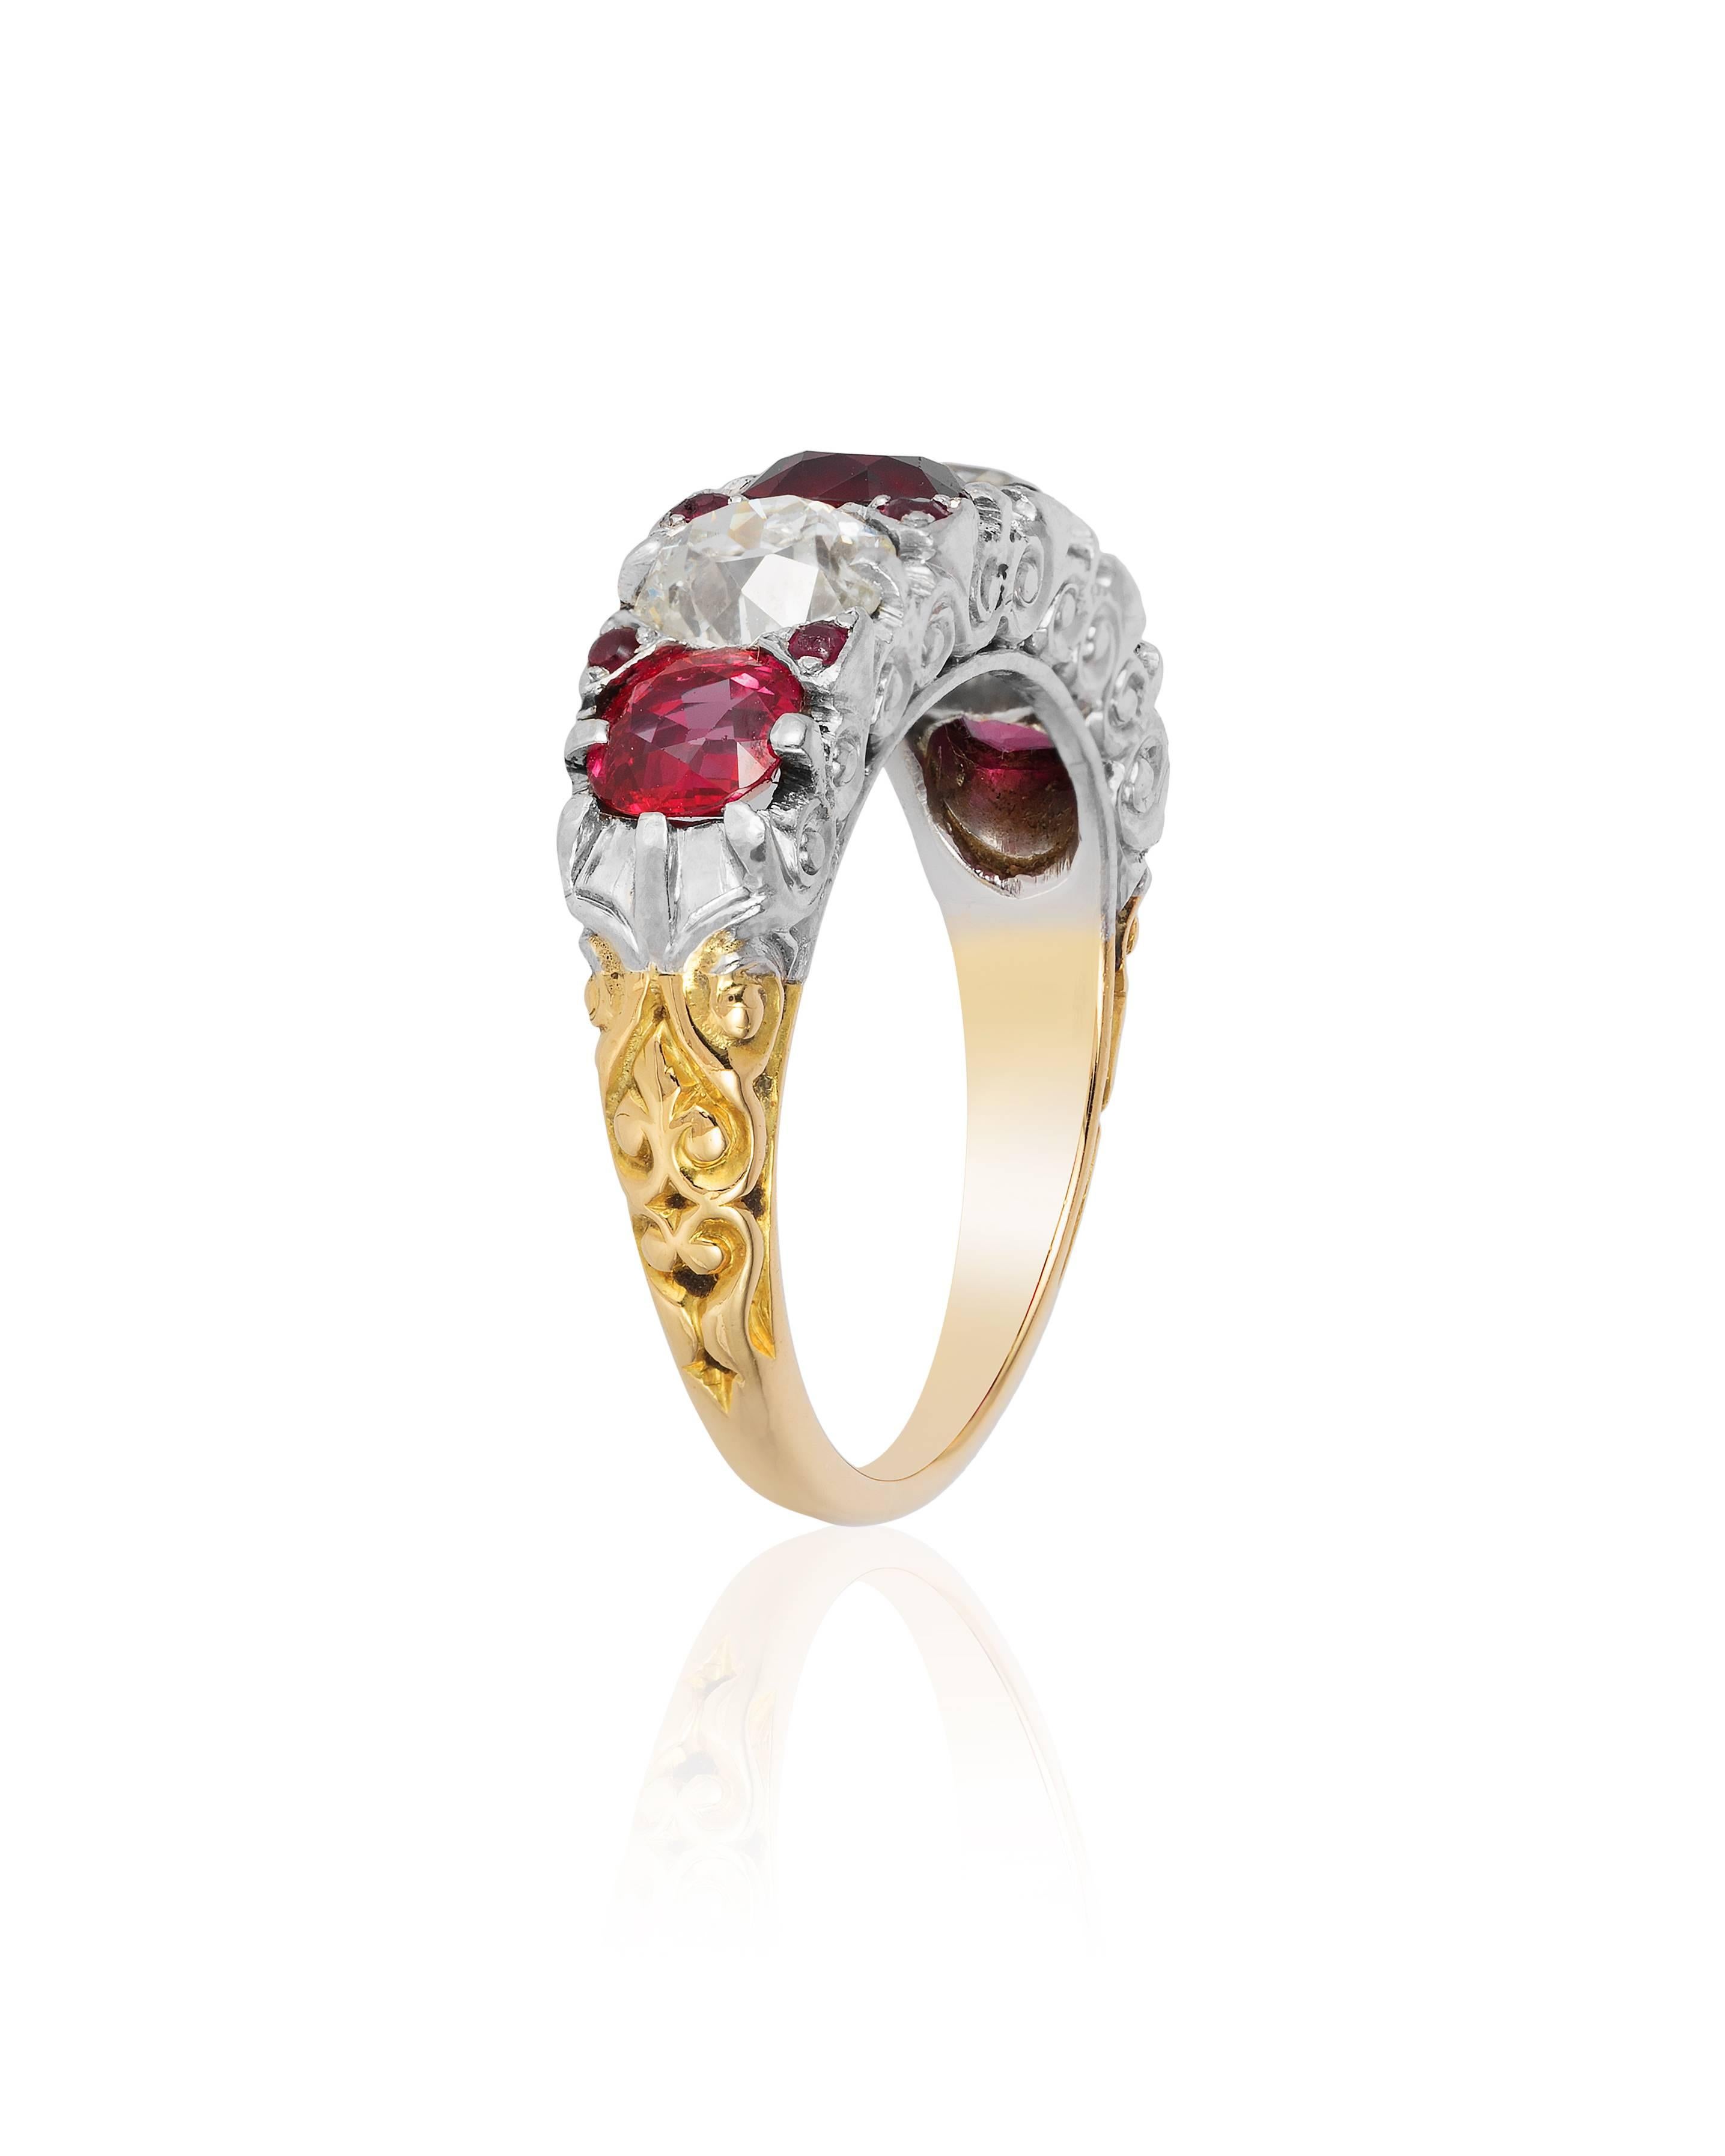 Beautifully crafted, this ring by Tiffany features 3 beautiful Burmese rubies of superb color and clarity weighing approximately 1.8 to 2.2 carats and two Old European diamonds weighing approximately 1.0 to 1.5 carats.  The ring is further enhanced